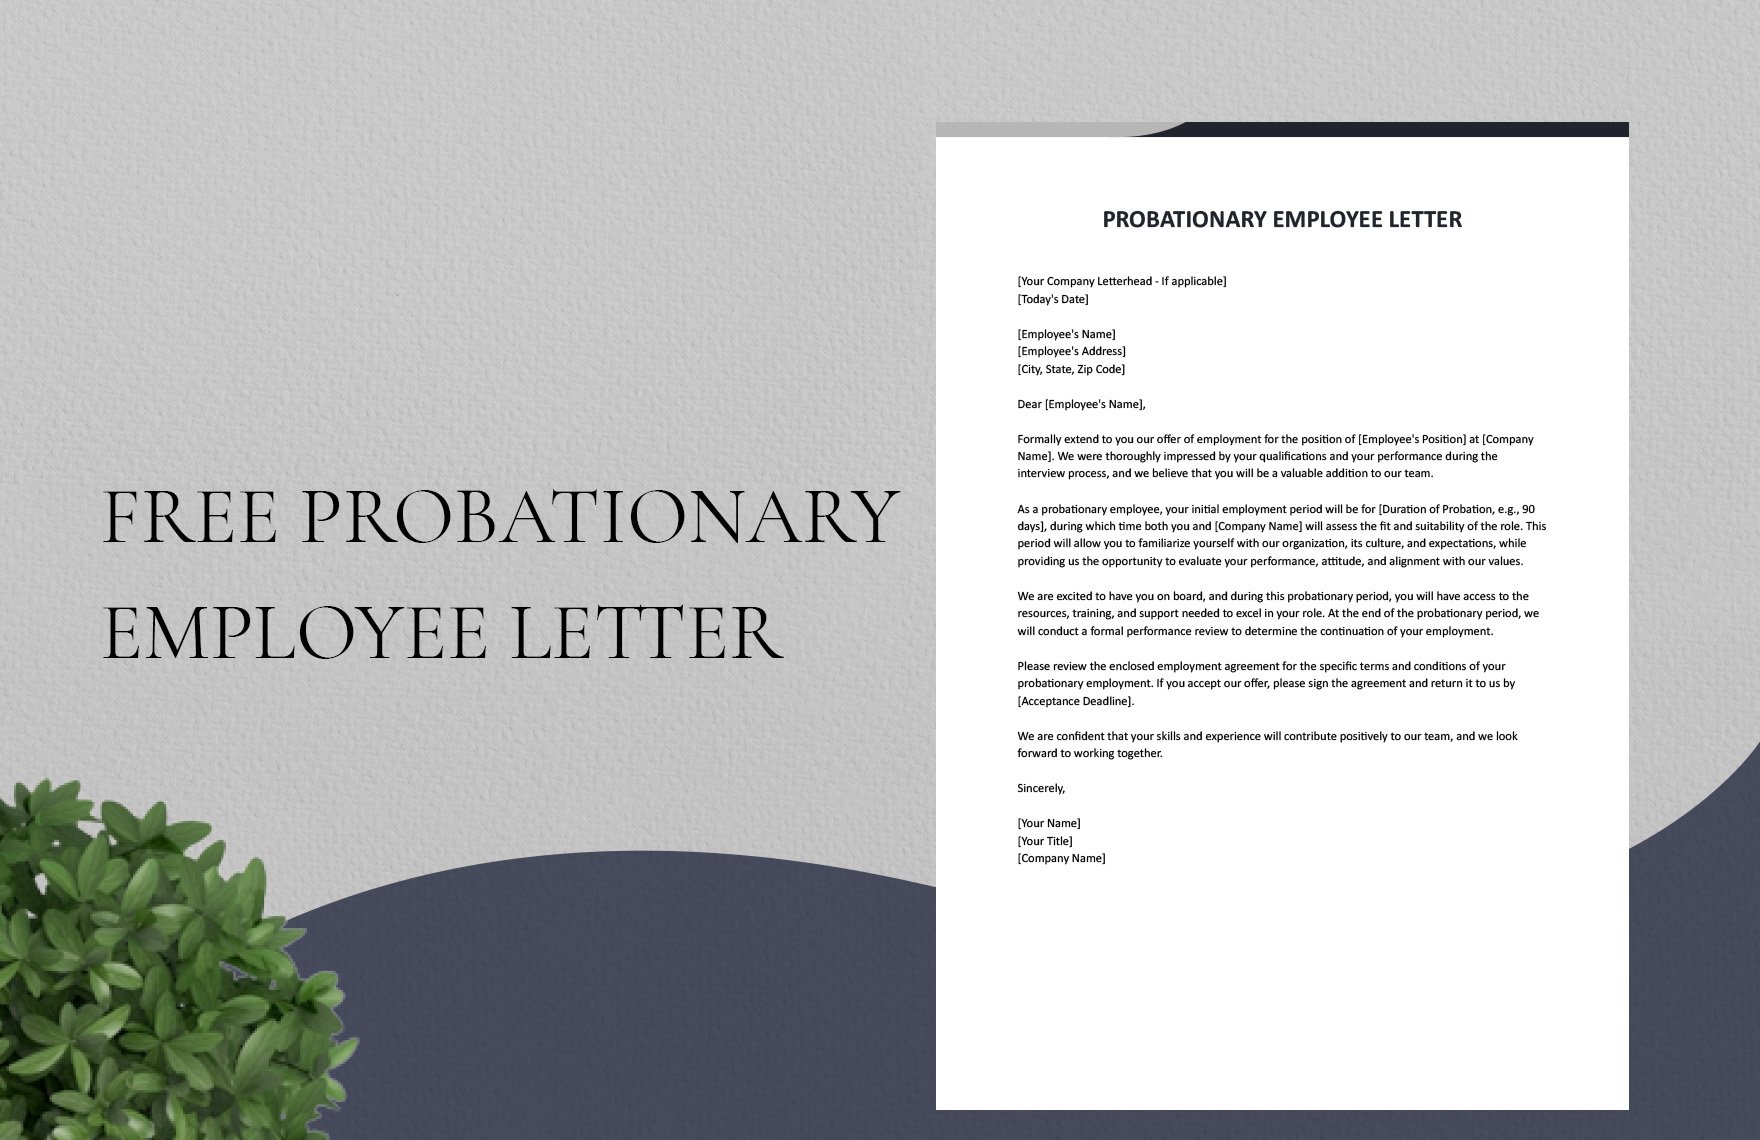 Probationary Employee Letter